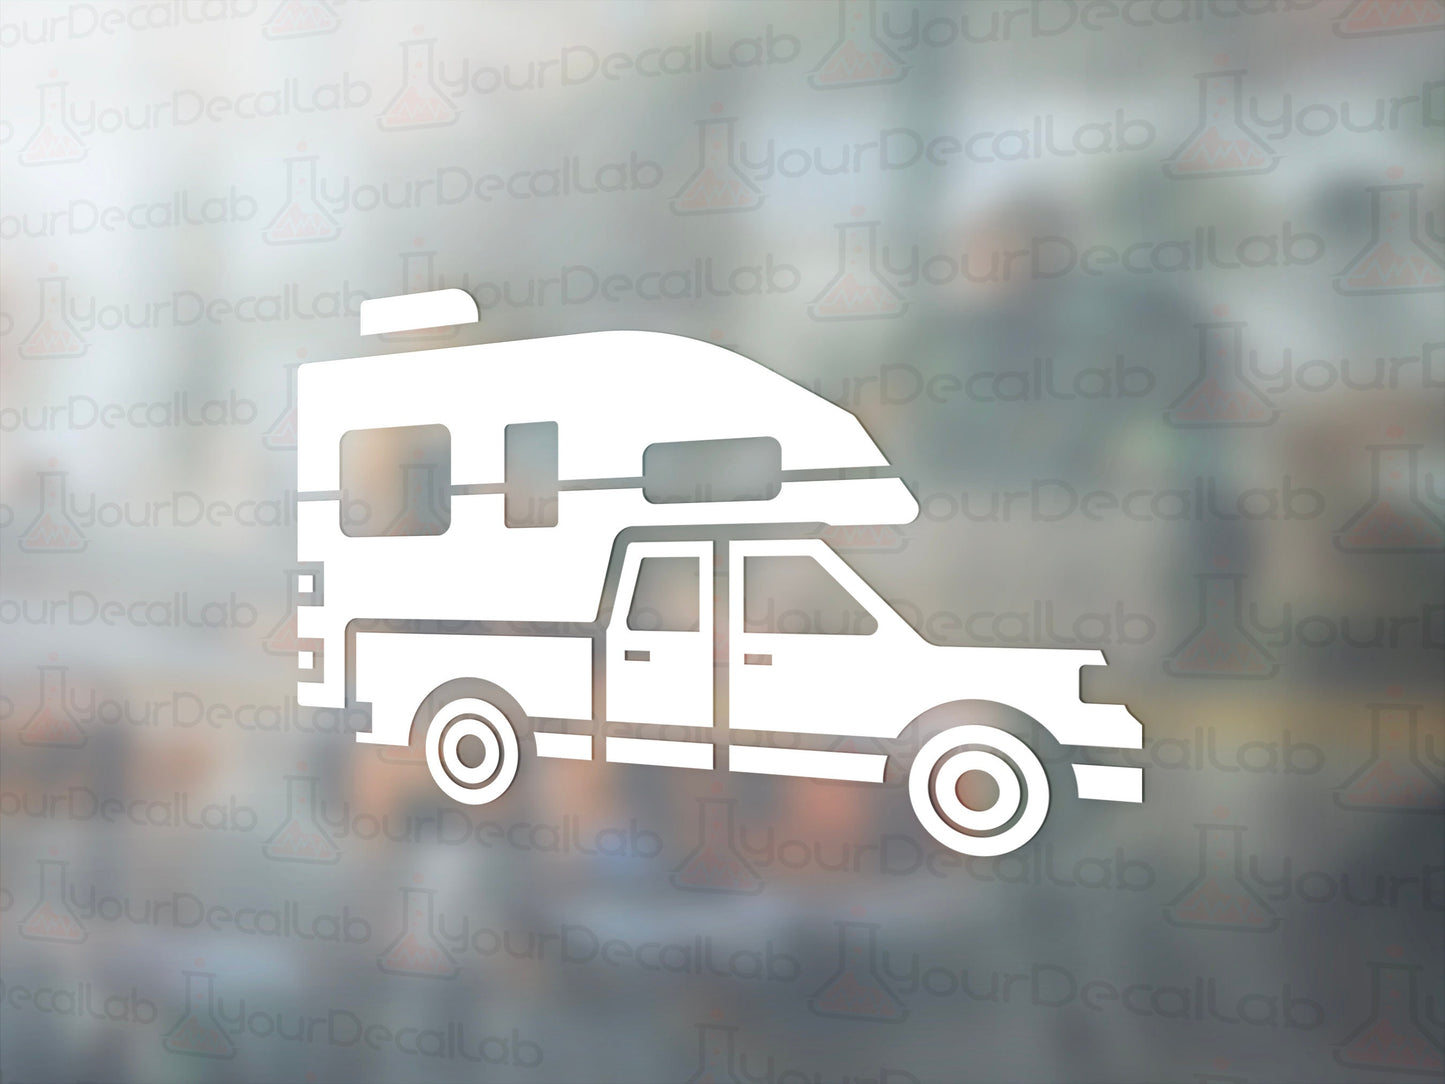 Truck Camper Decal - Many Colors & Sizes